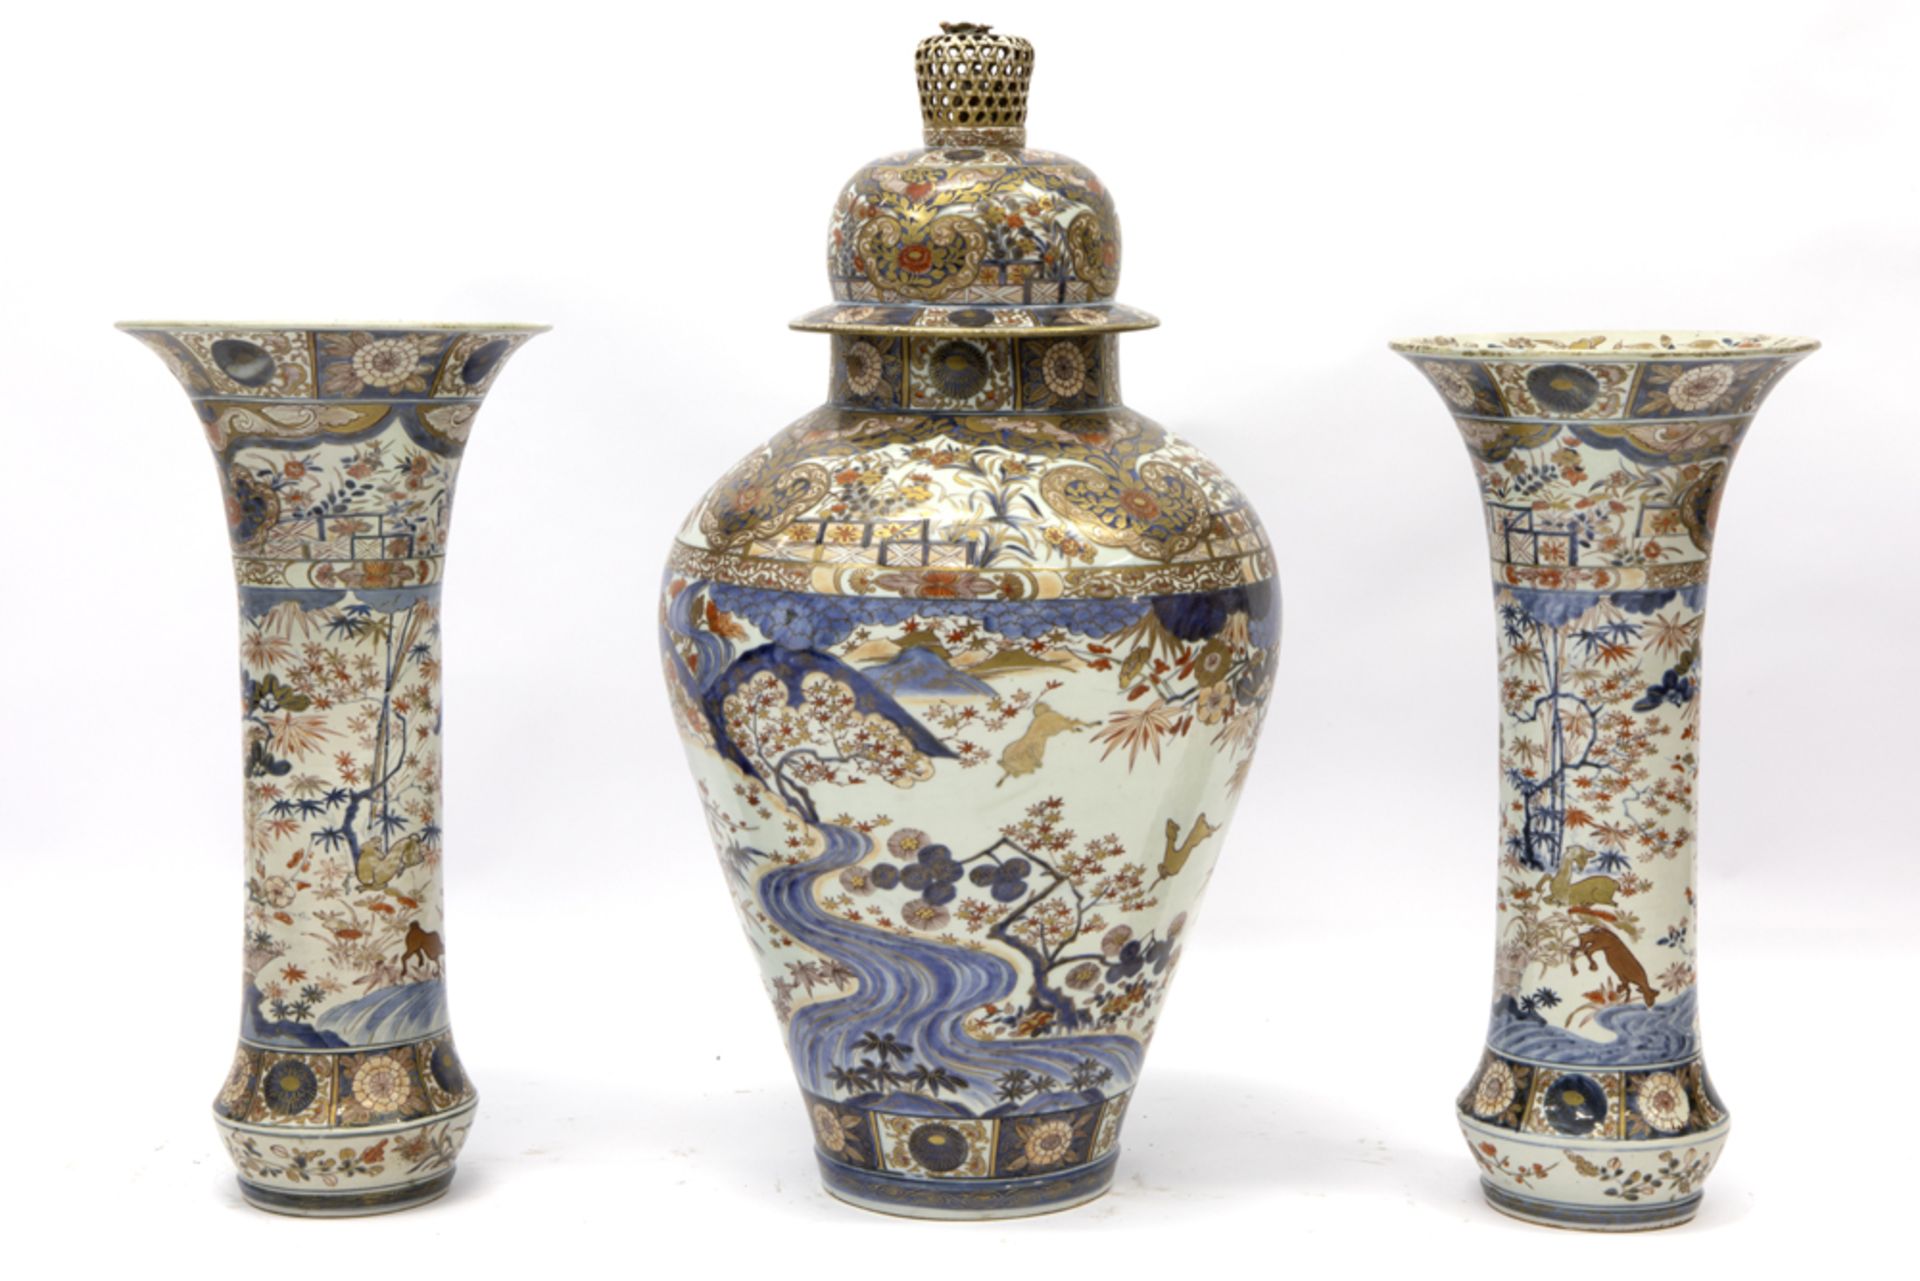 antique imposing 3pc garniture in porcelain with a fine Imari decor : a pair of vases and a vase - Image 2 of 5